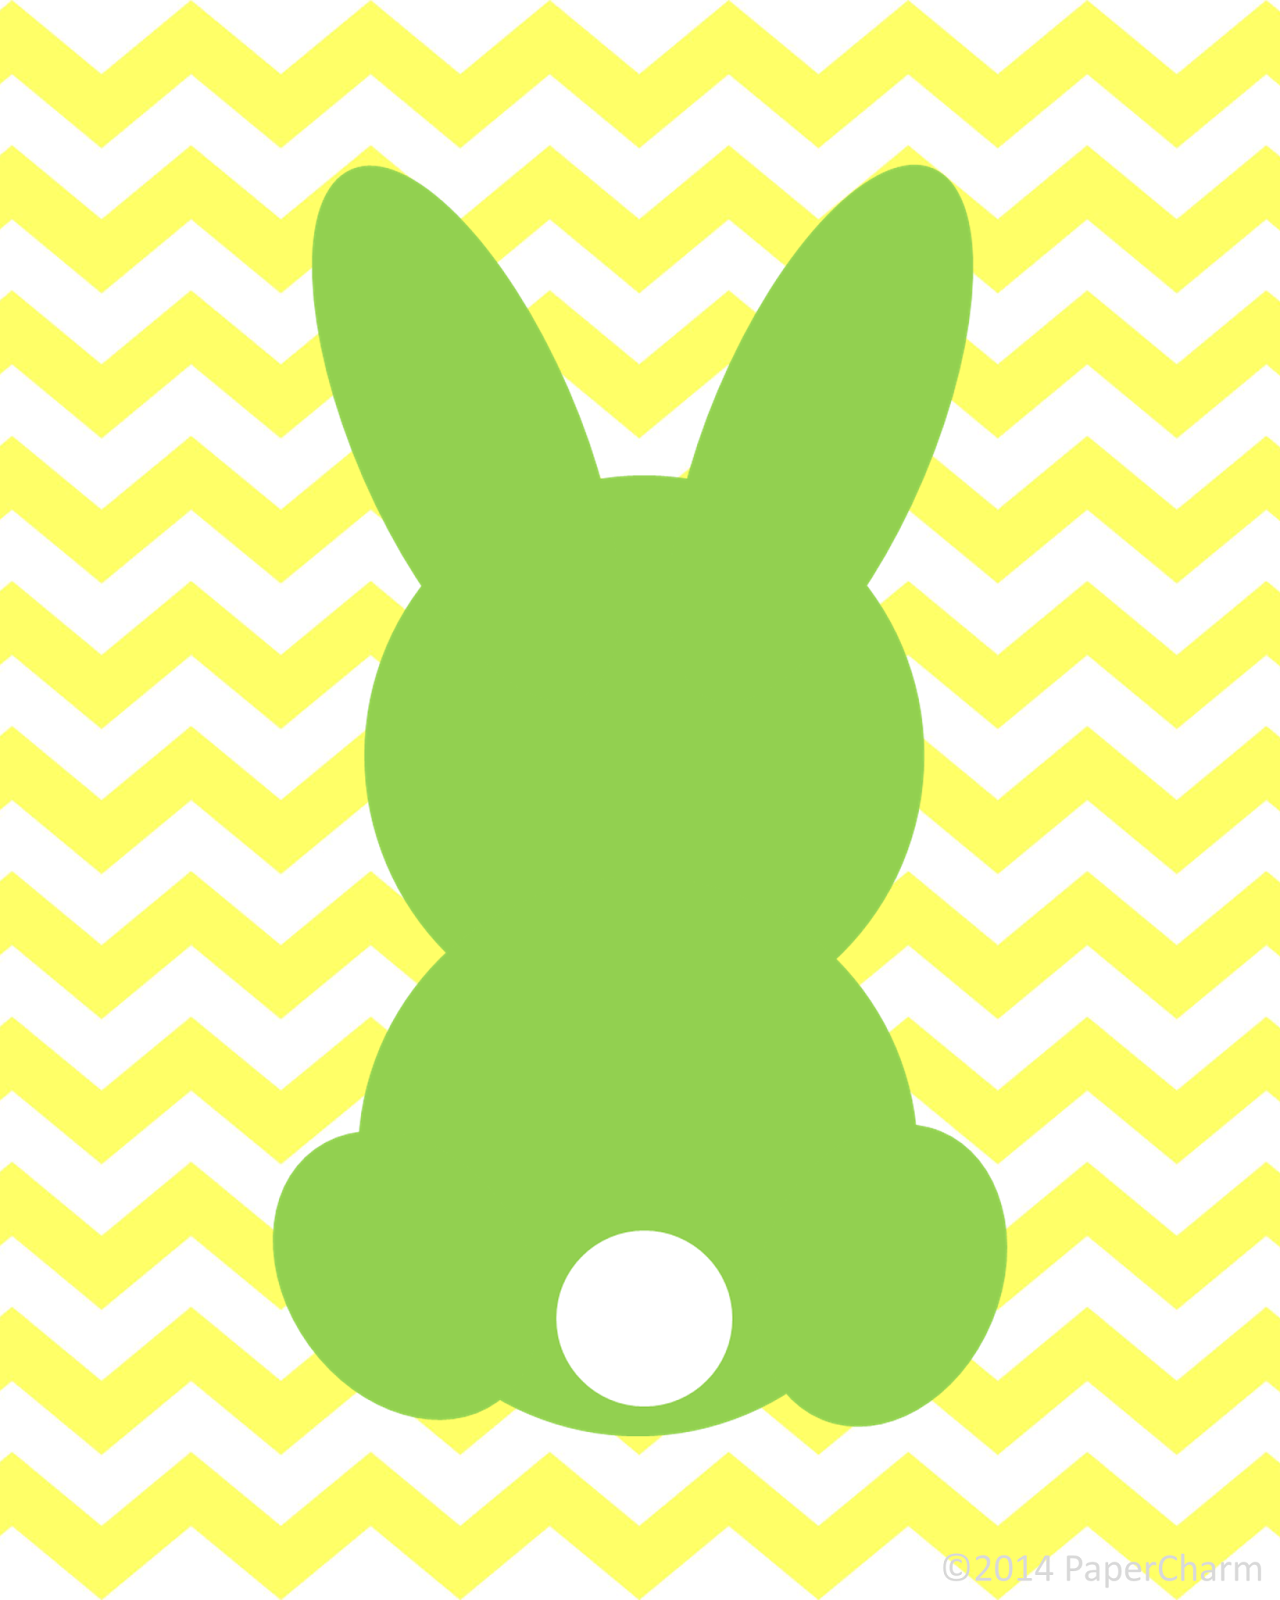 5-best-images-of-free-bunny-silhouette-printable-8-x-10-free